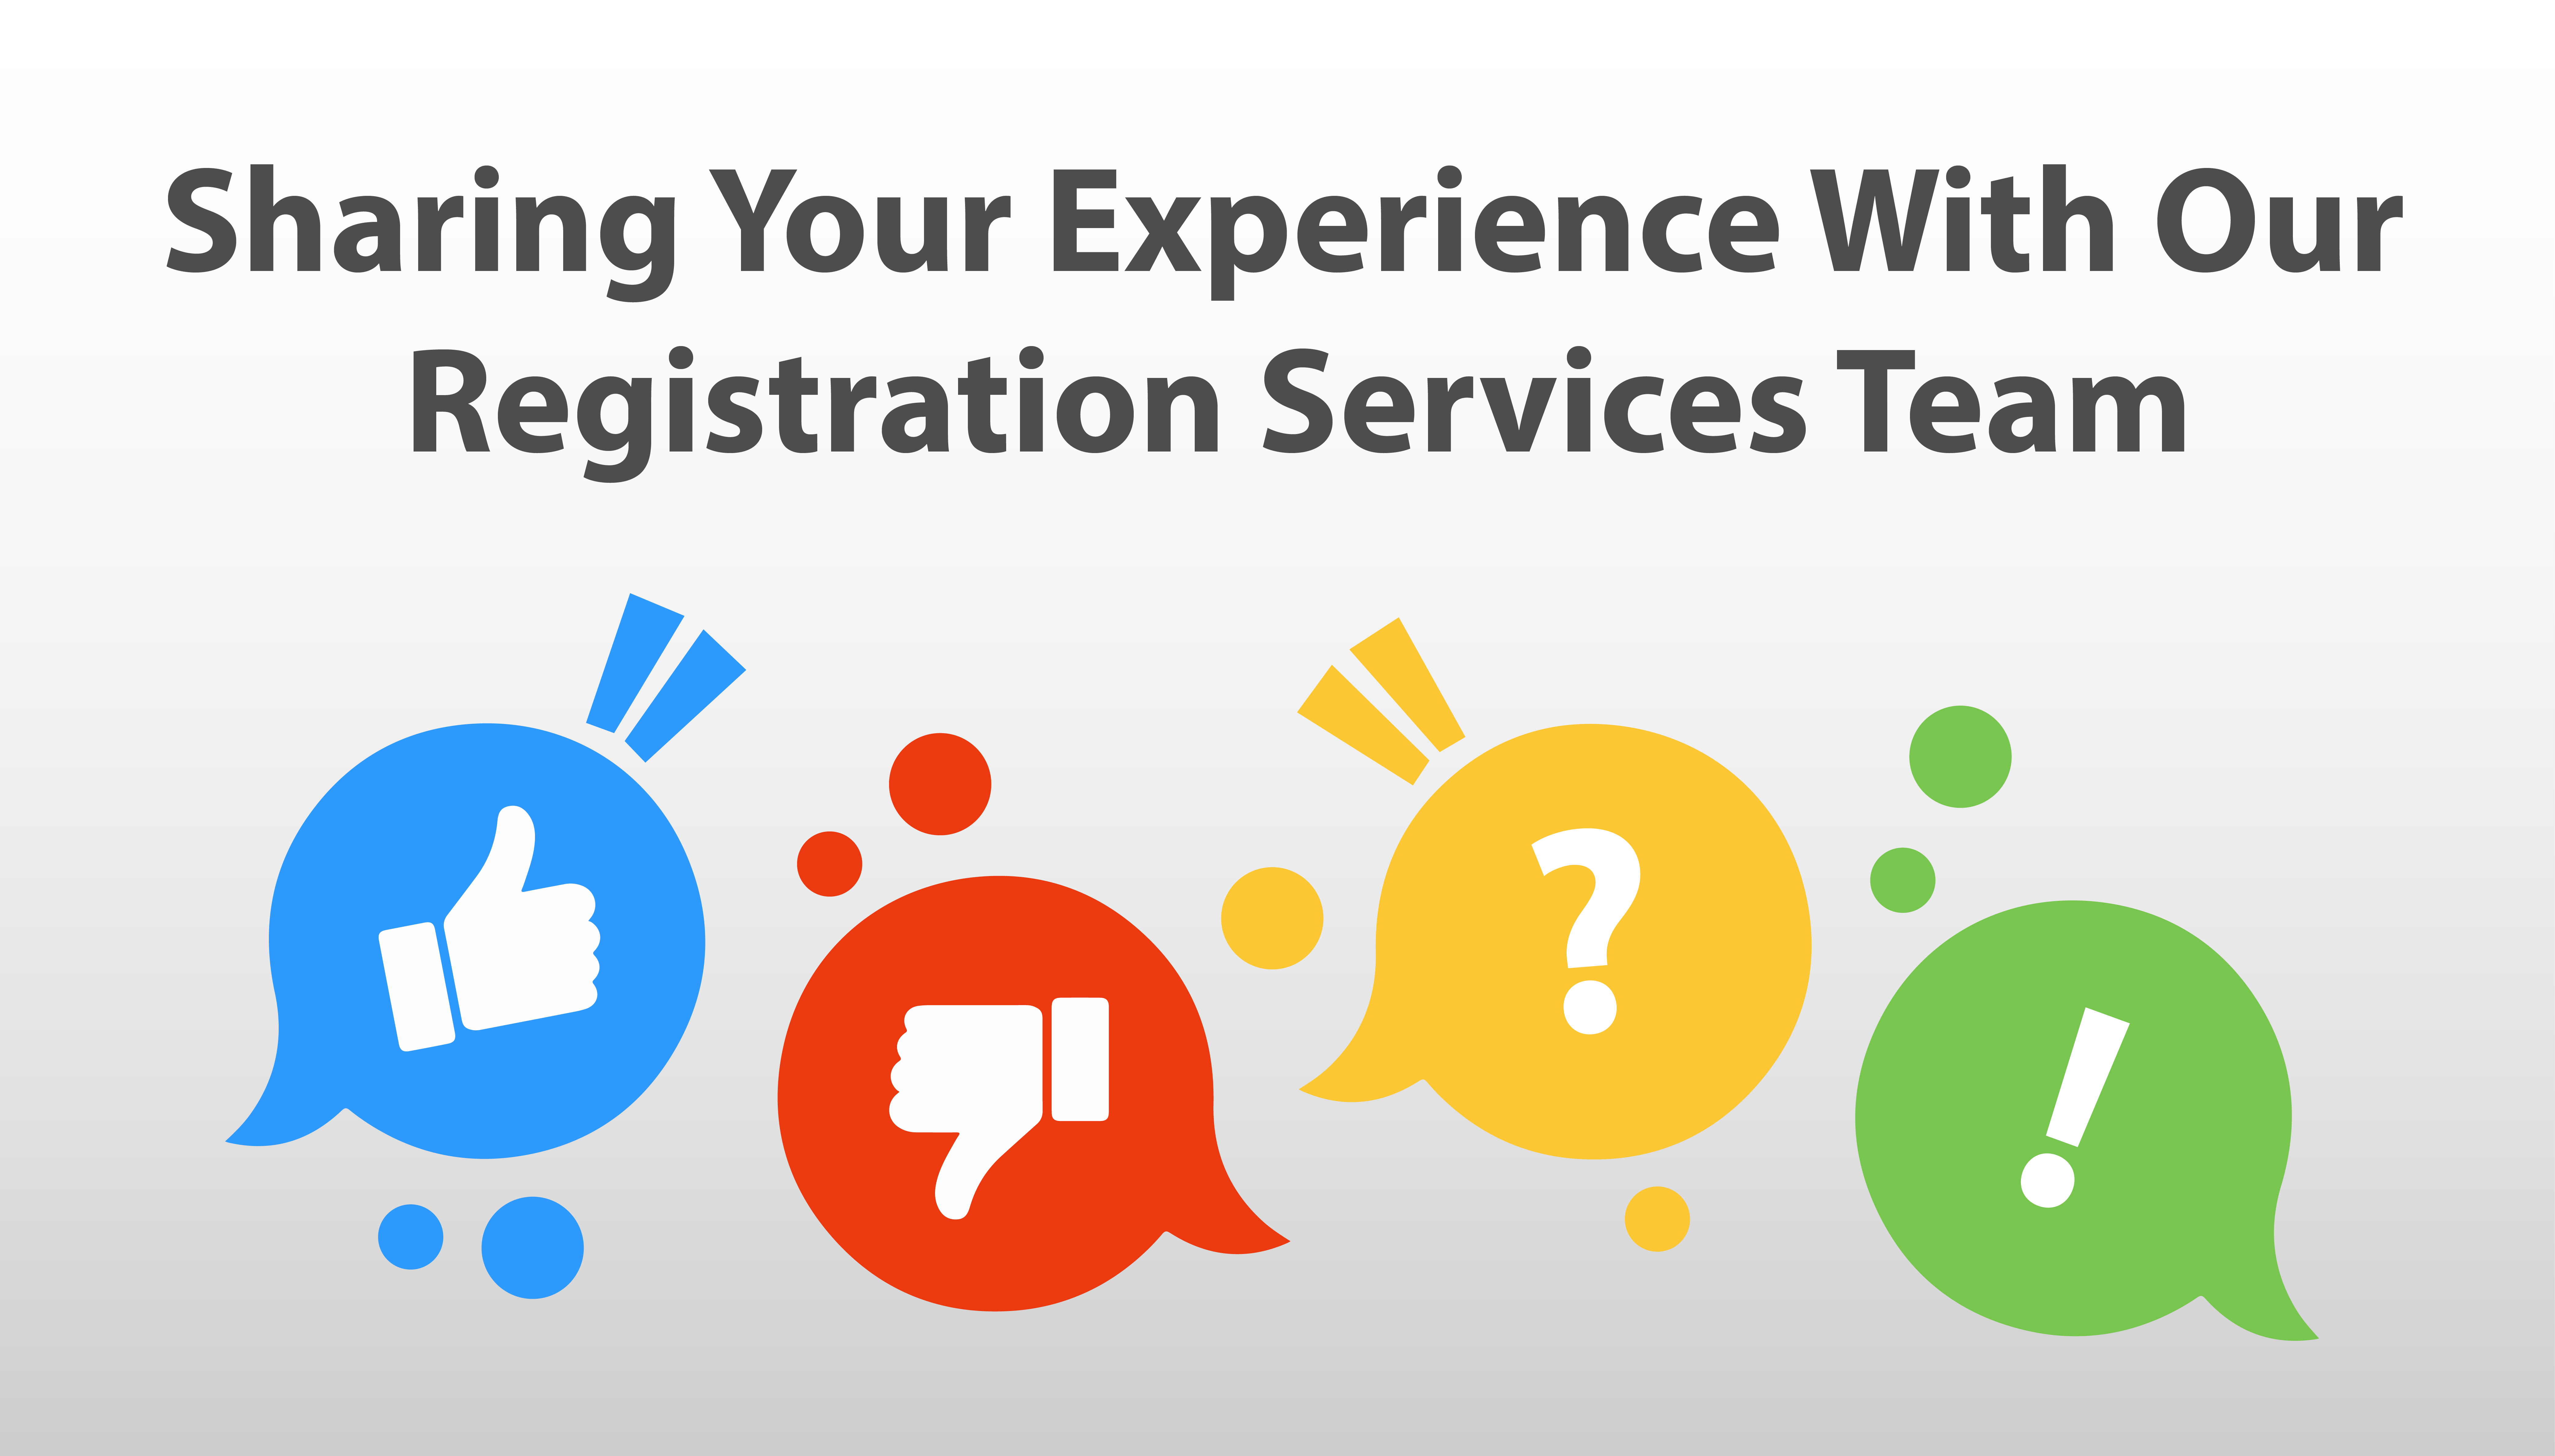 Sharing Your Experience with our Registration Services Team